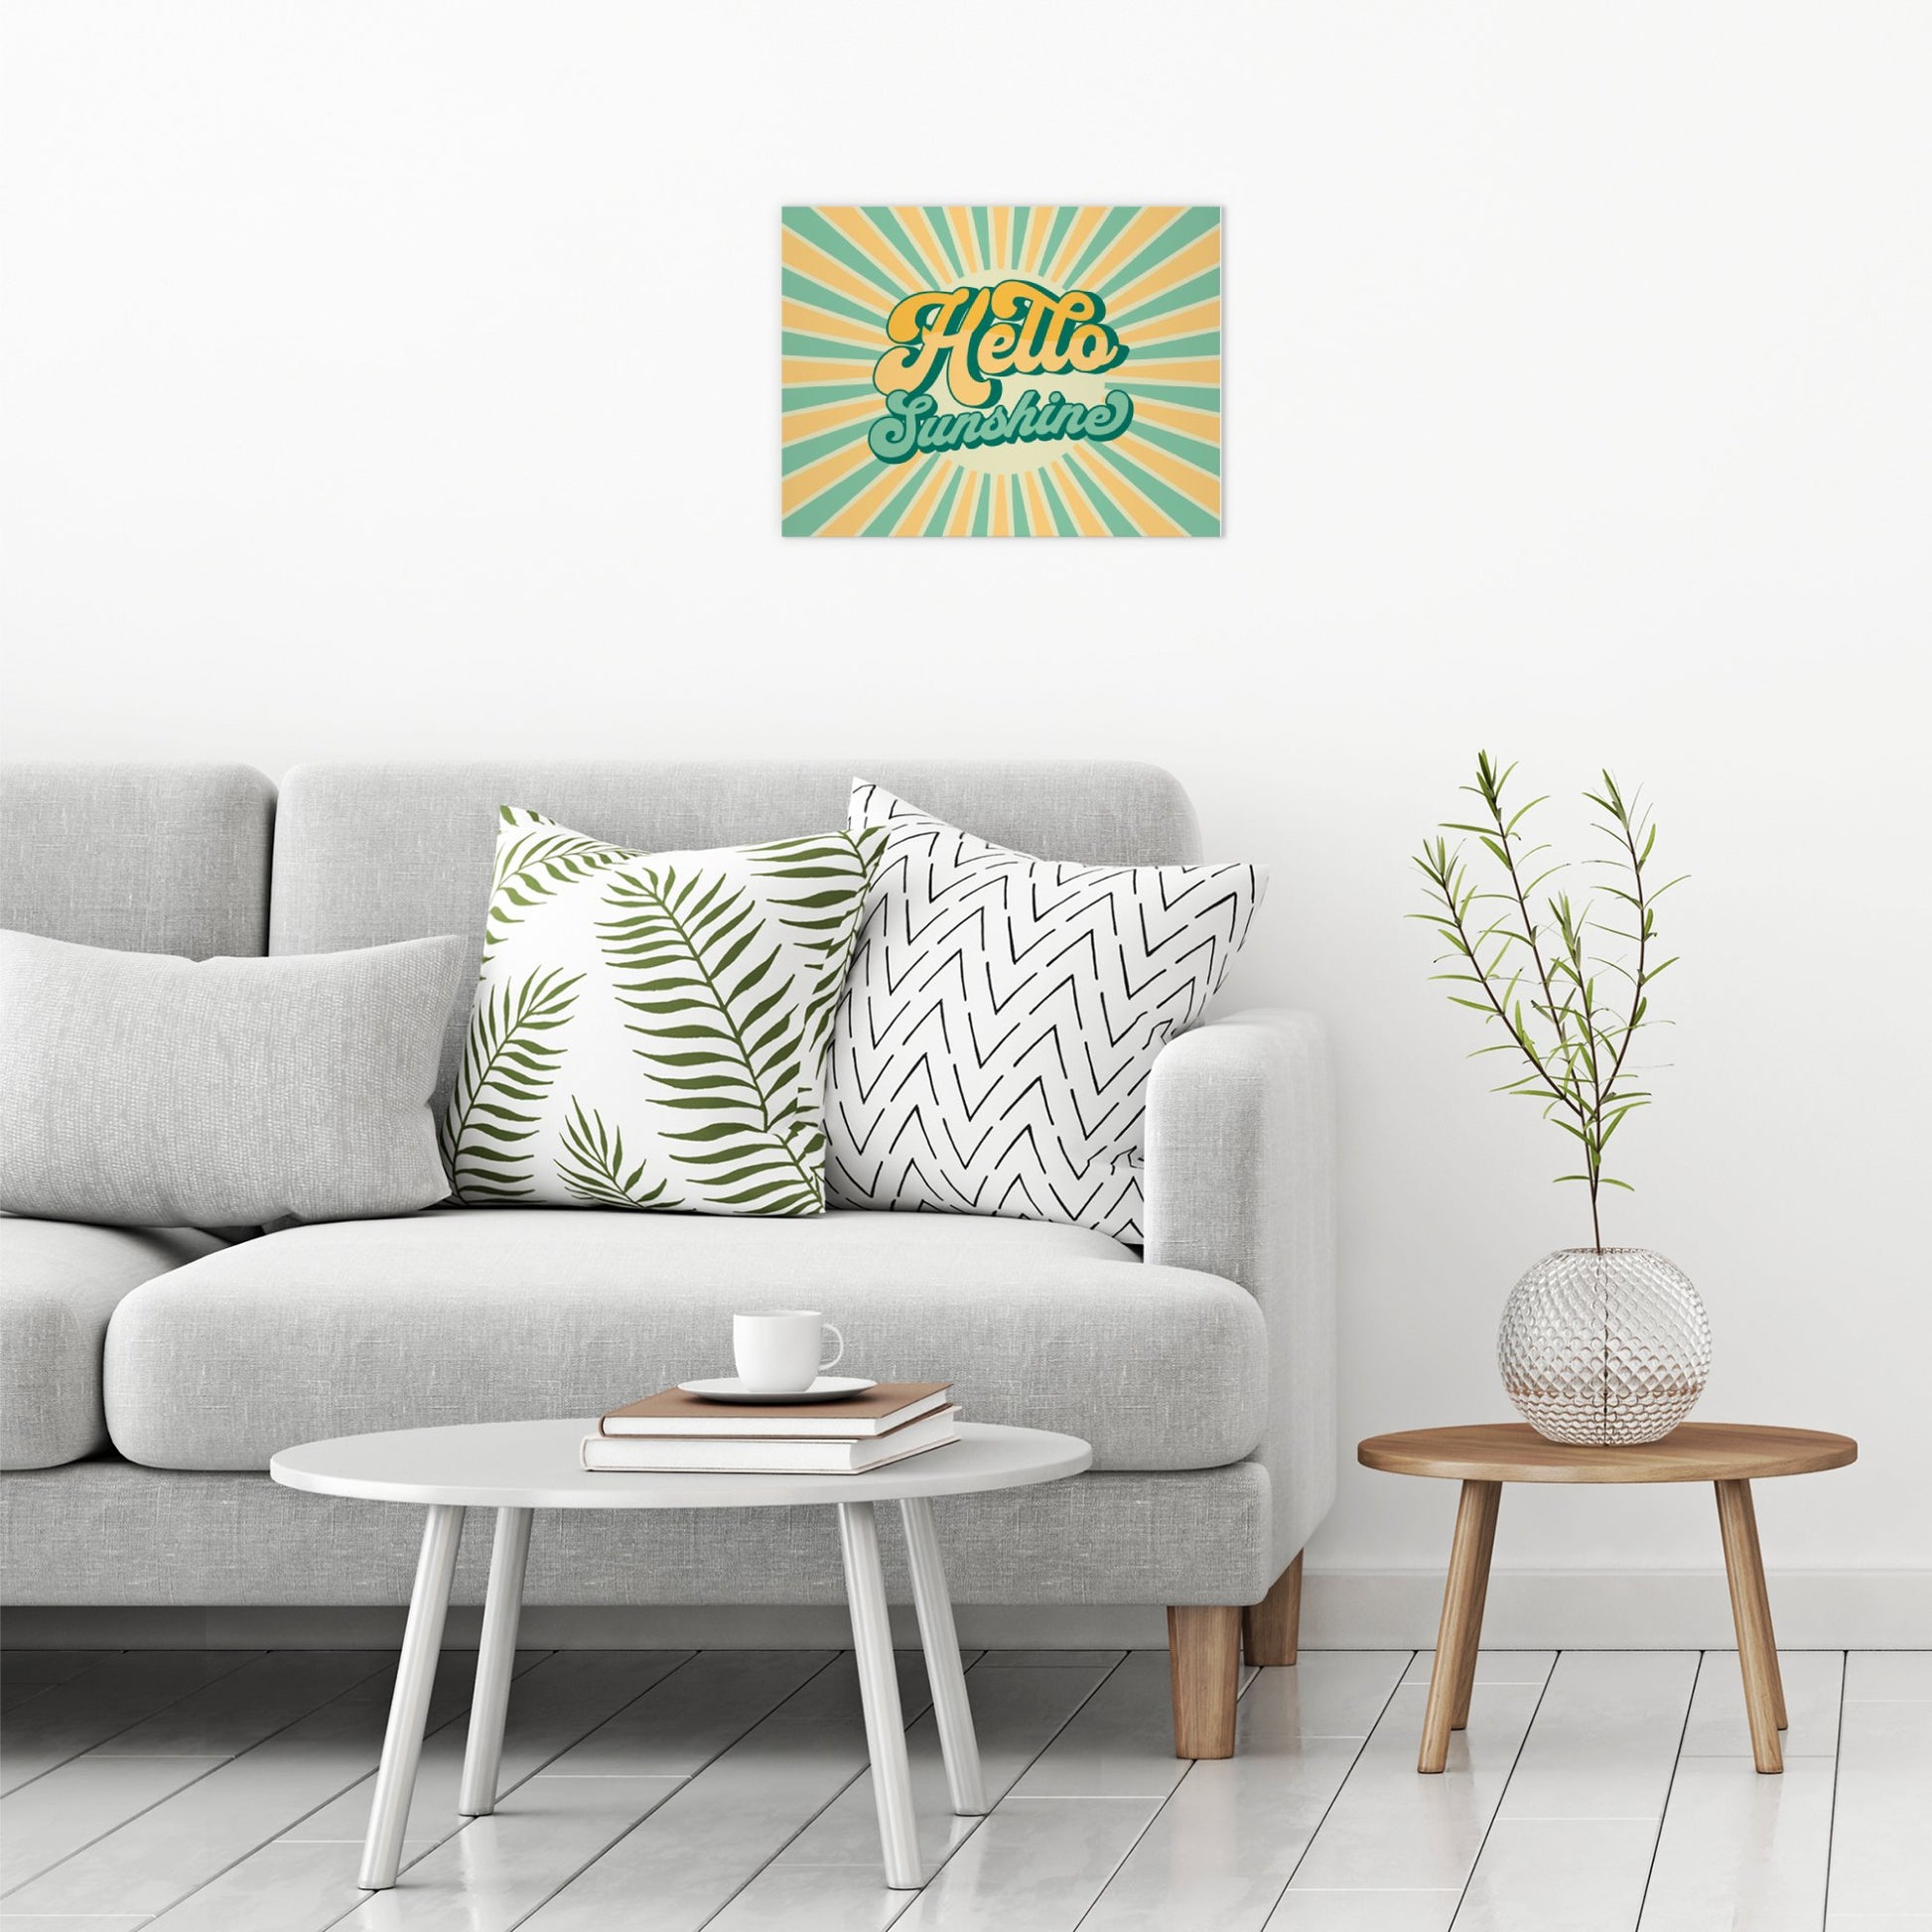 A contemporary modern room view showing a medium size metal art poster display plate with printed design of a Hello Sunshine Quote